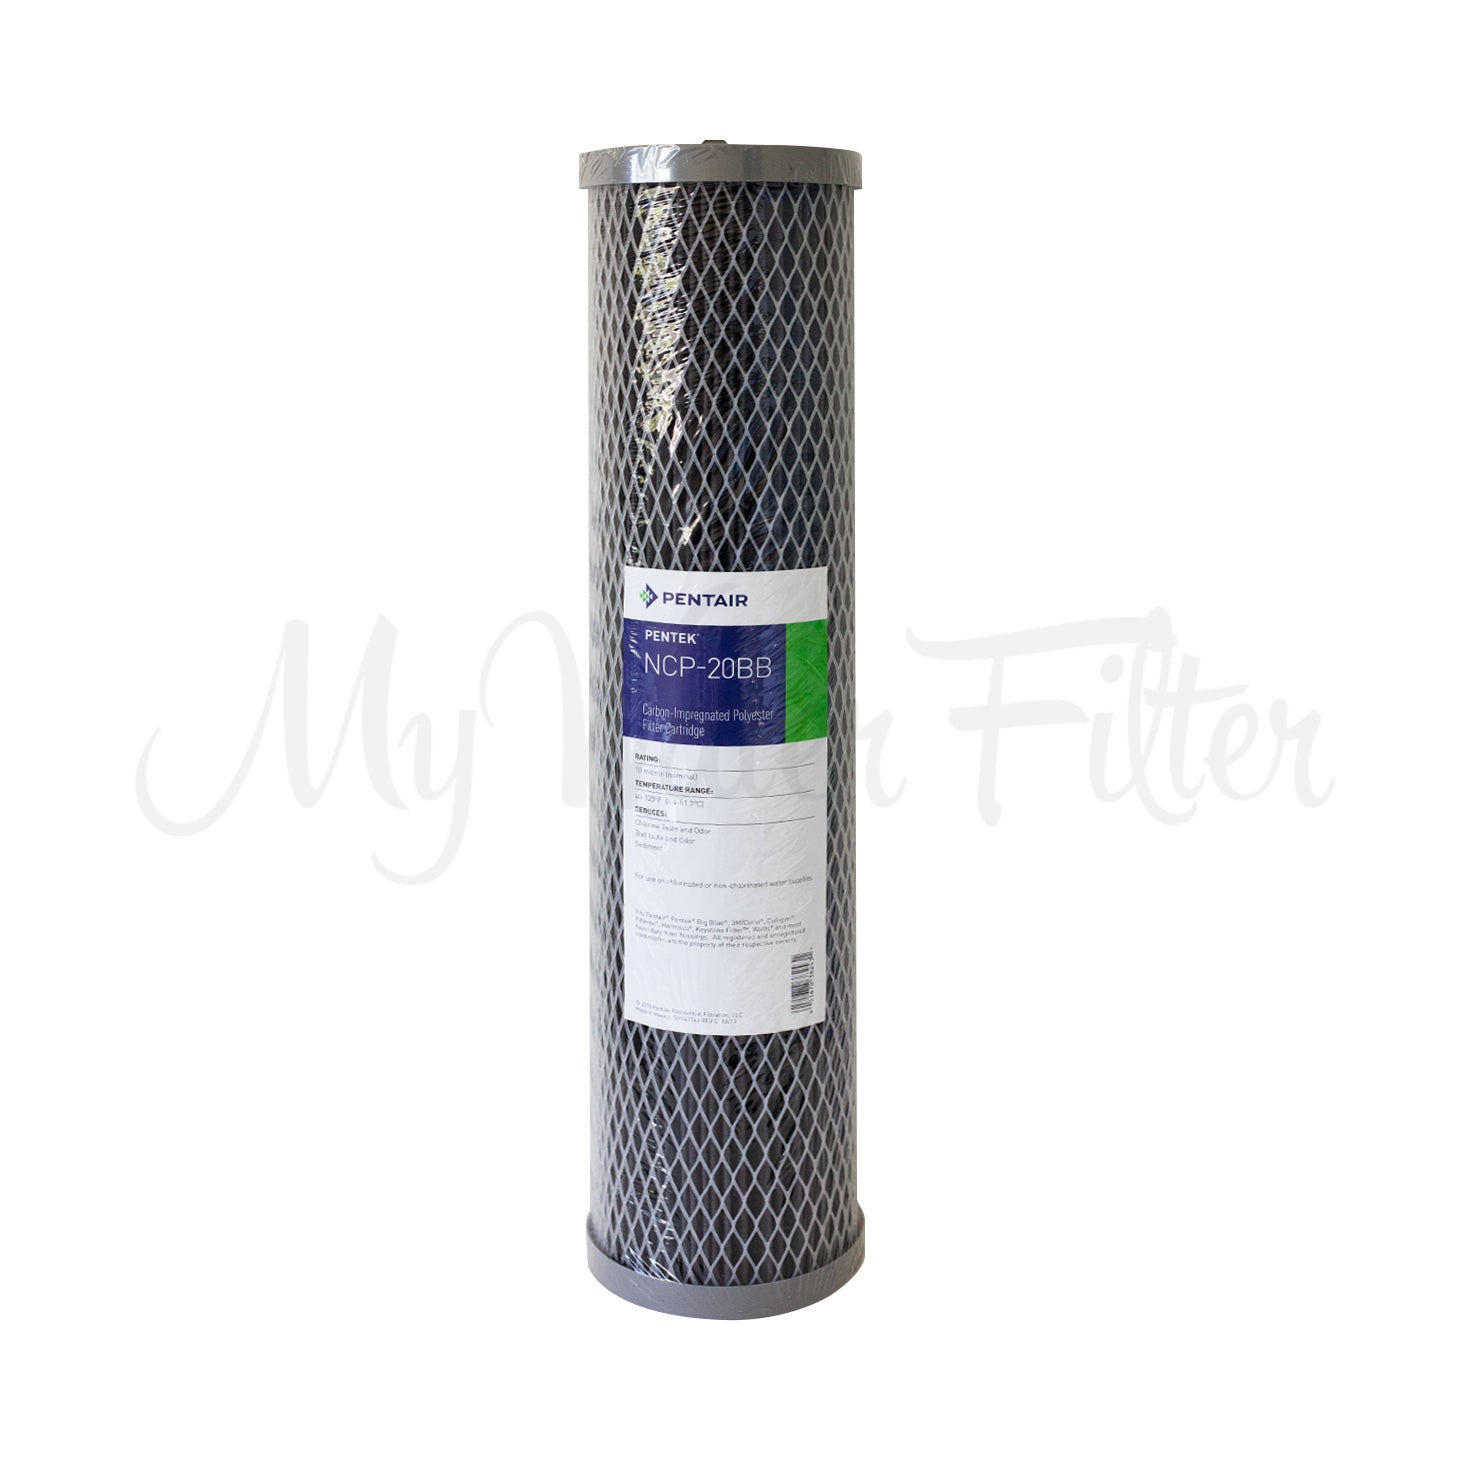 MWF 20" x 4.5" Twin Big Blue Whole House LOW PRESSURE Rain Water Tank Filter System Complete with Ultraviolet Light